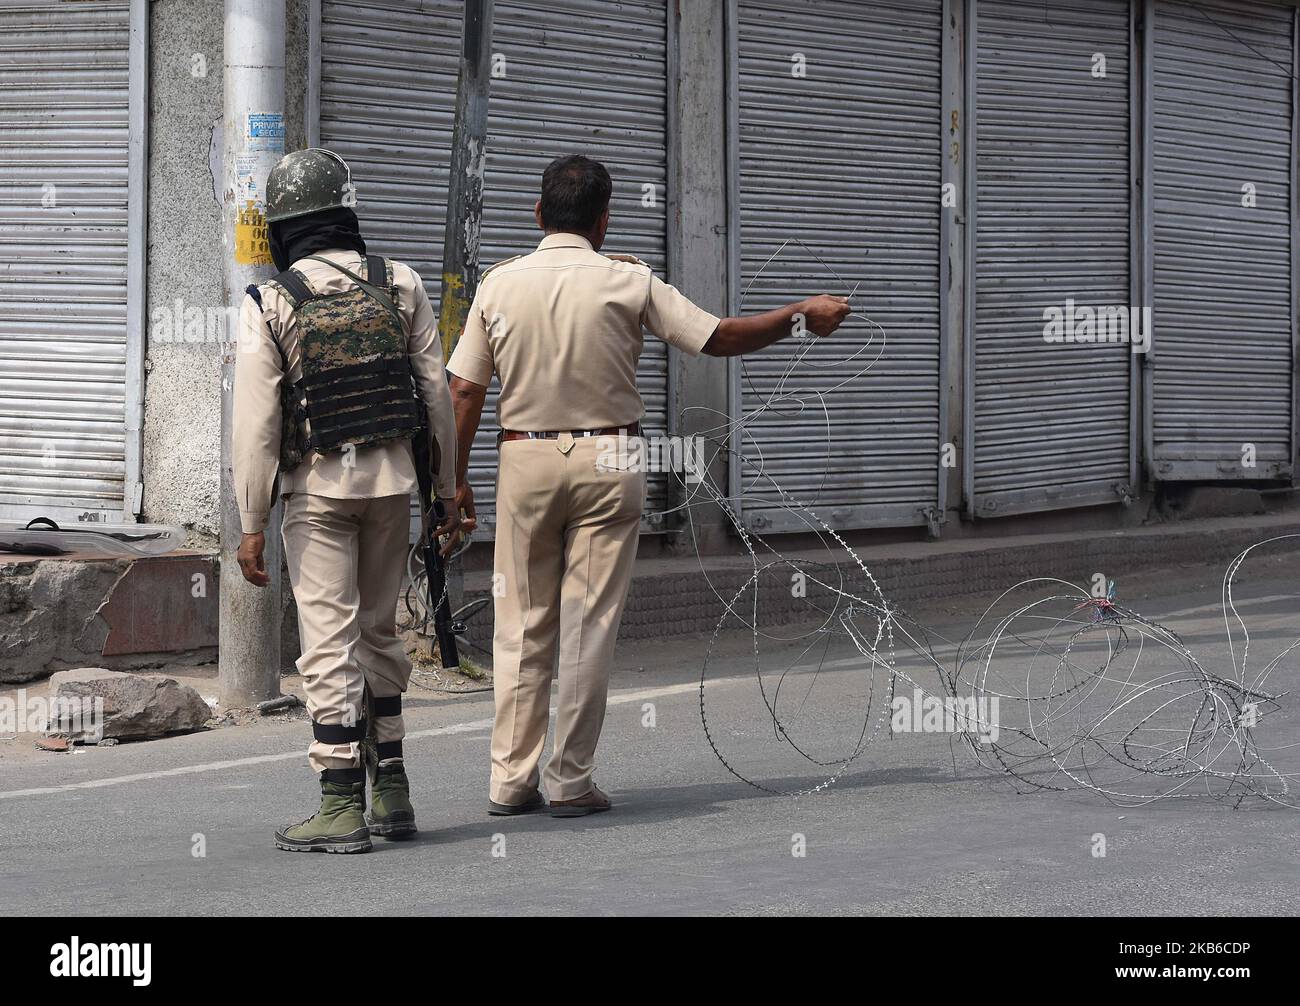 Indian paramilitary soldiers install concertina wire during restrictions in old city Srinagar on September 20, 2019.Kashmir valley continues to remain shut for the 47th consecutive day after India revoked Article 370 which granted Kashmir autonomy.However, authorities claim that restrictions have been eased in most parts of the Kashmir valley. (Photo by Faisal Khan/NurPhoto) Stock Photo